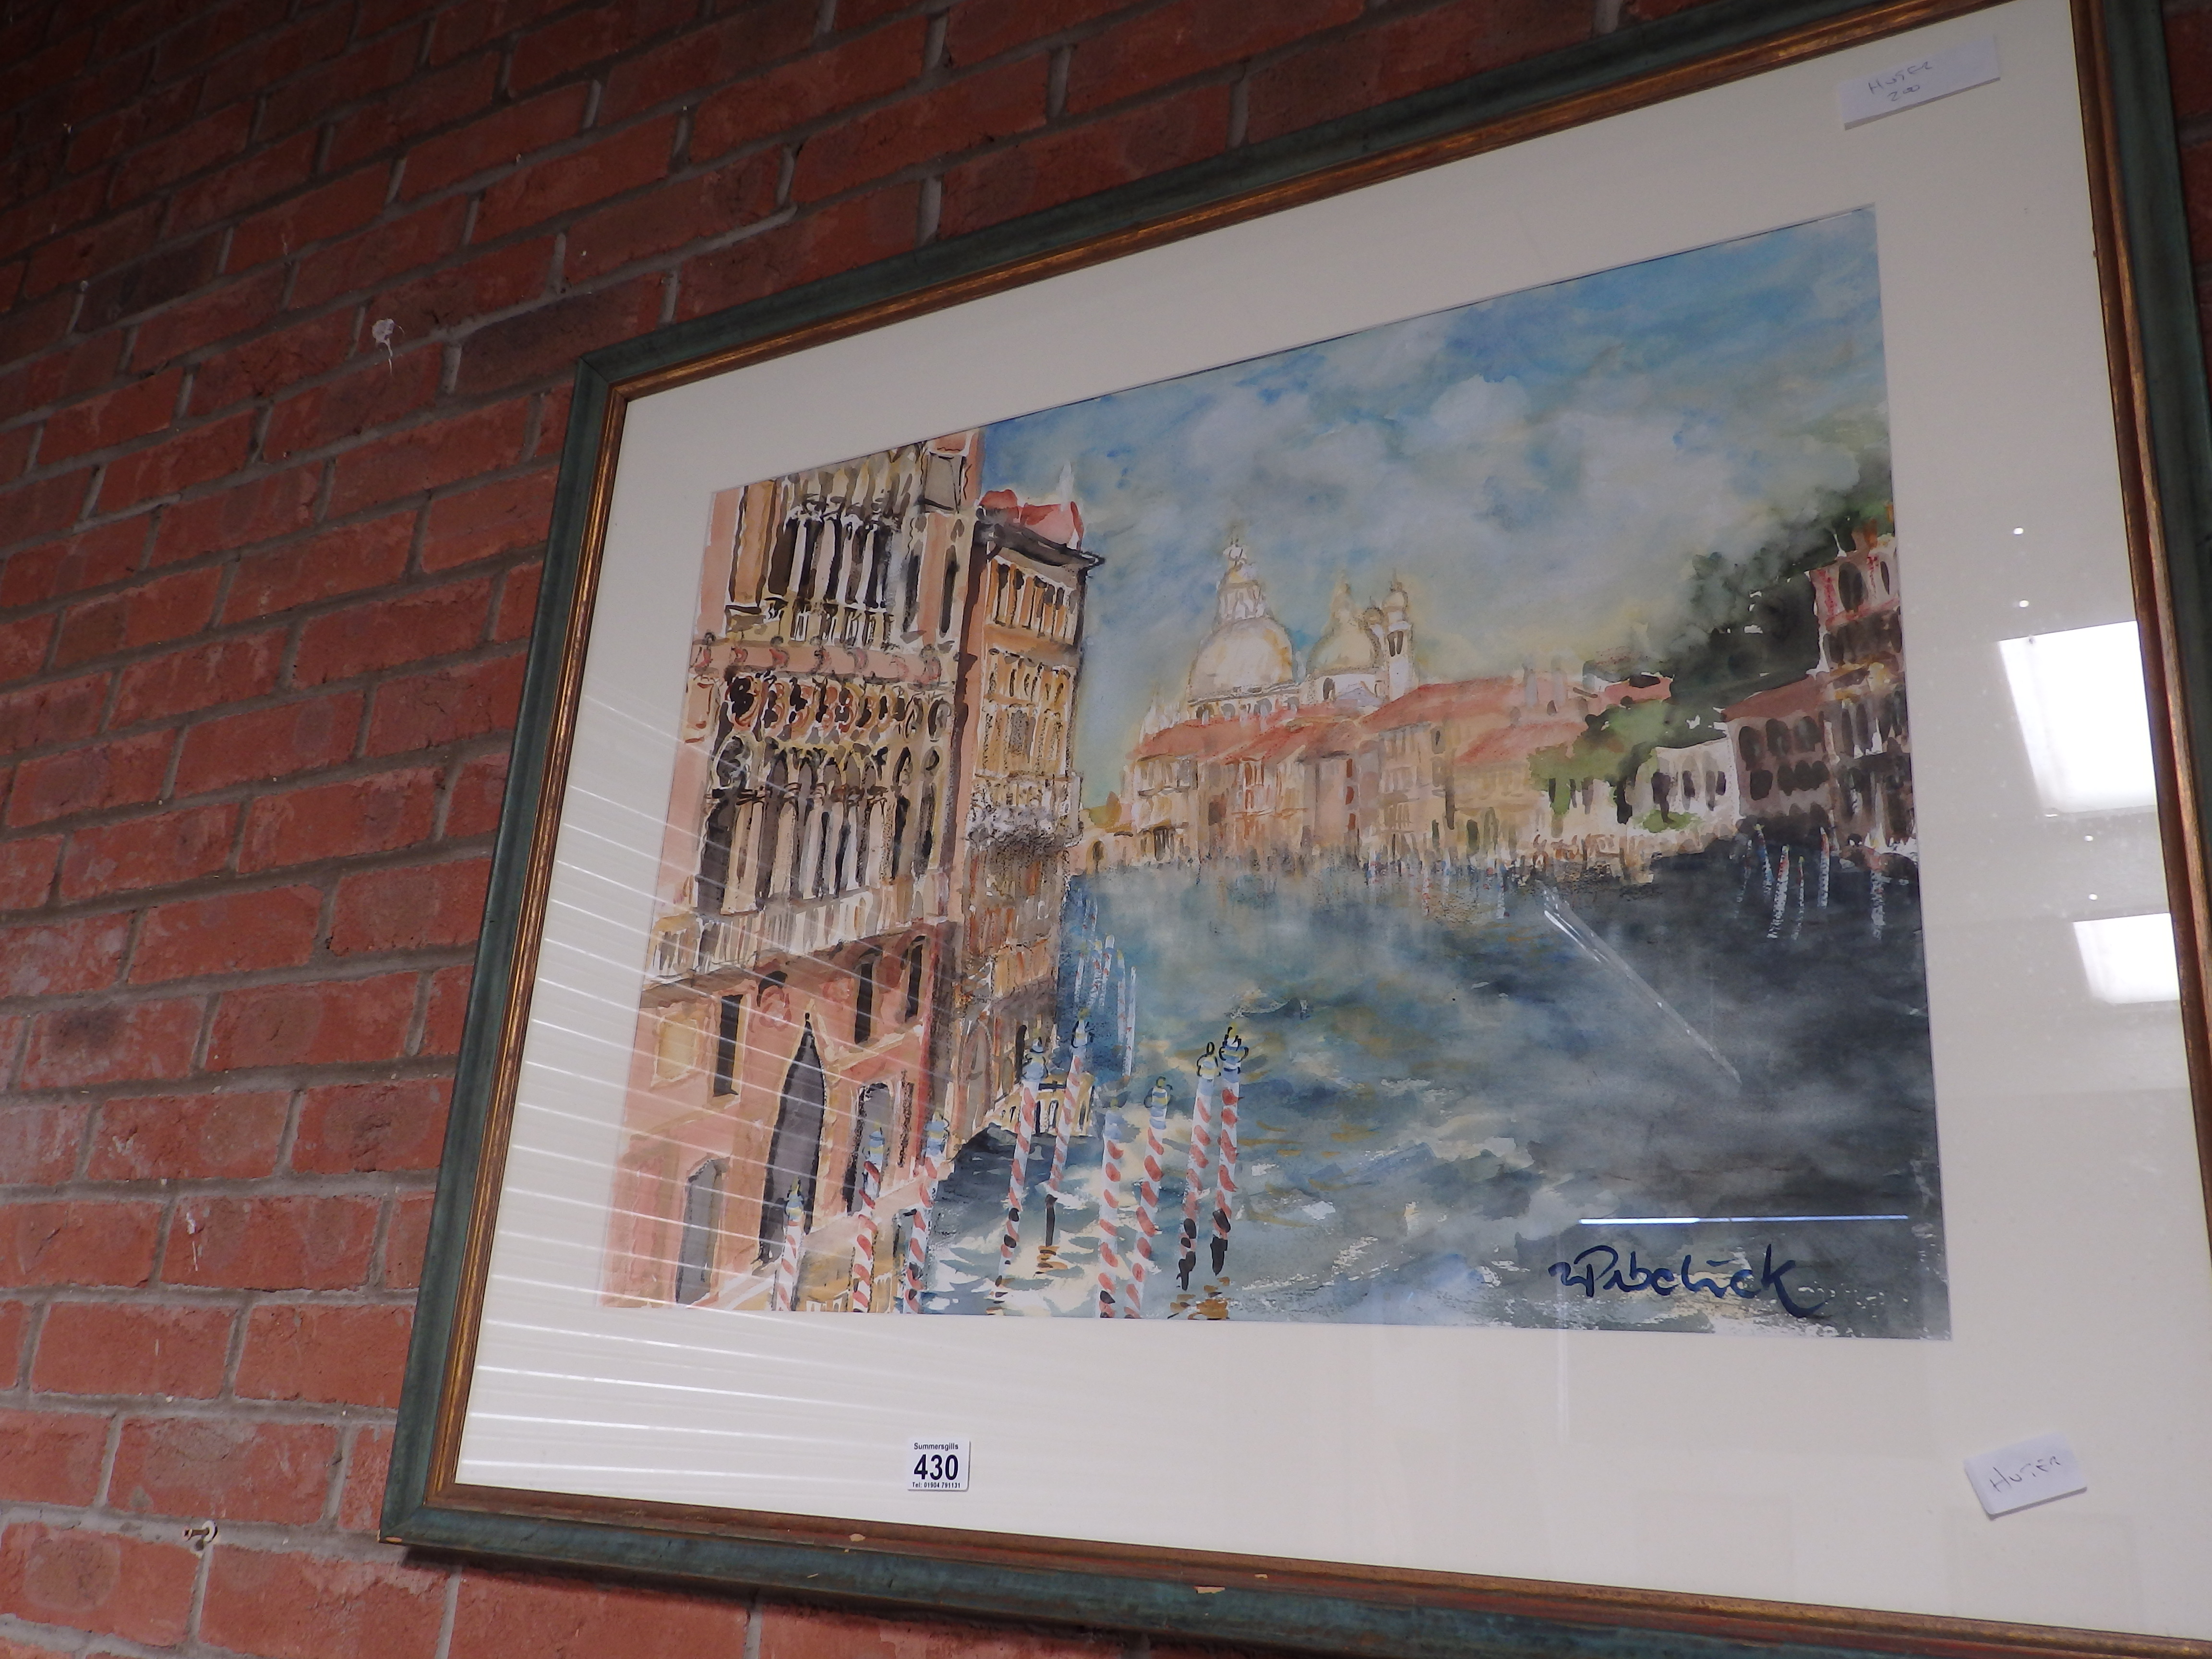 Watercolour of Venice by Pubelick